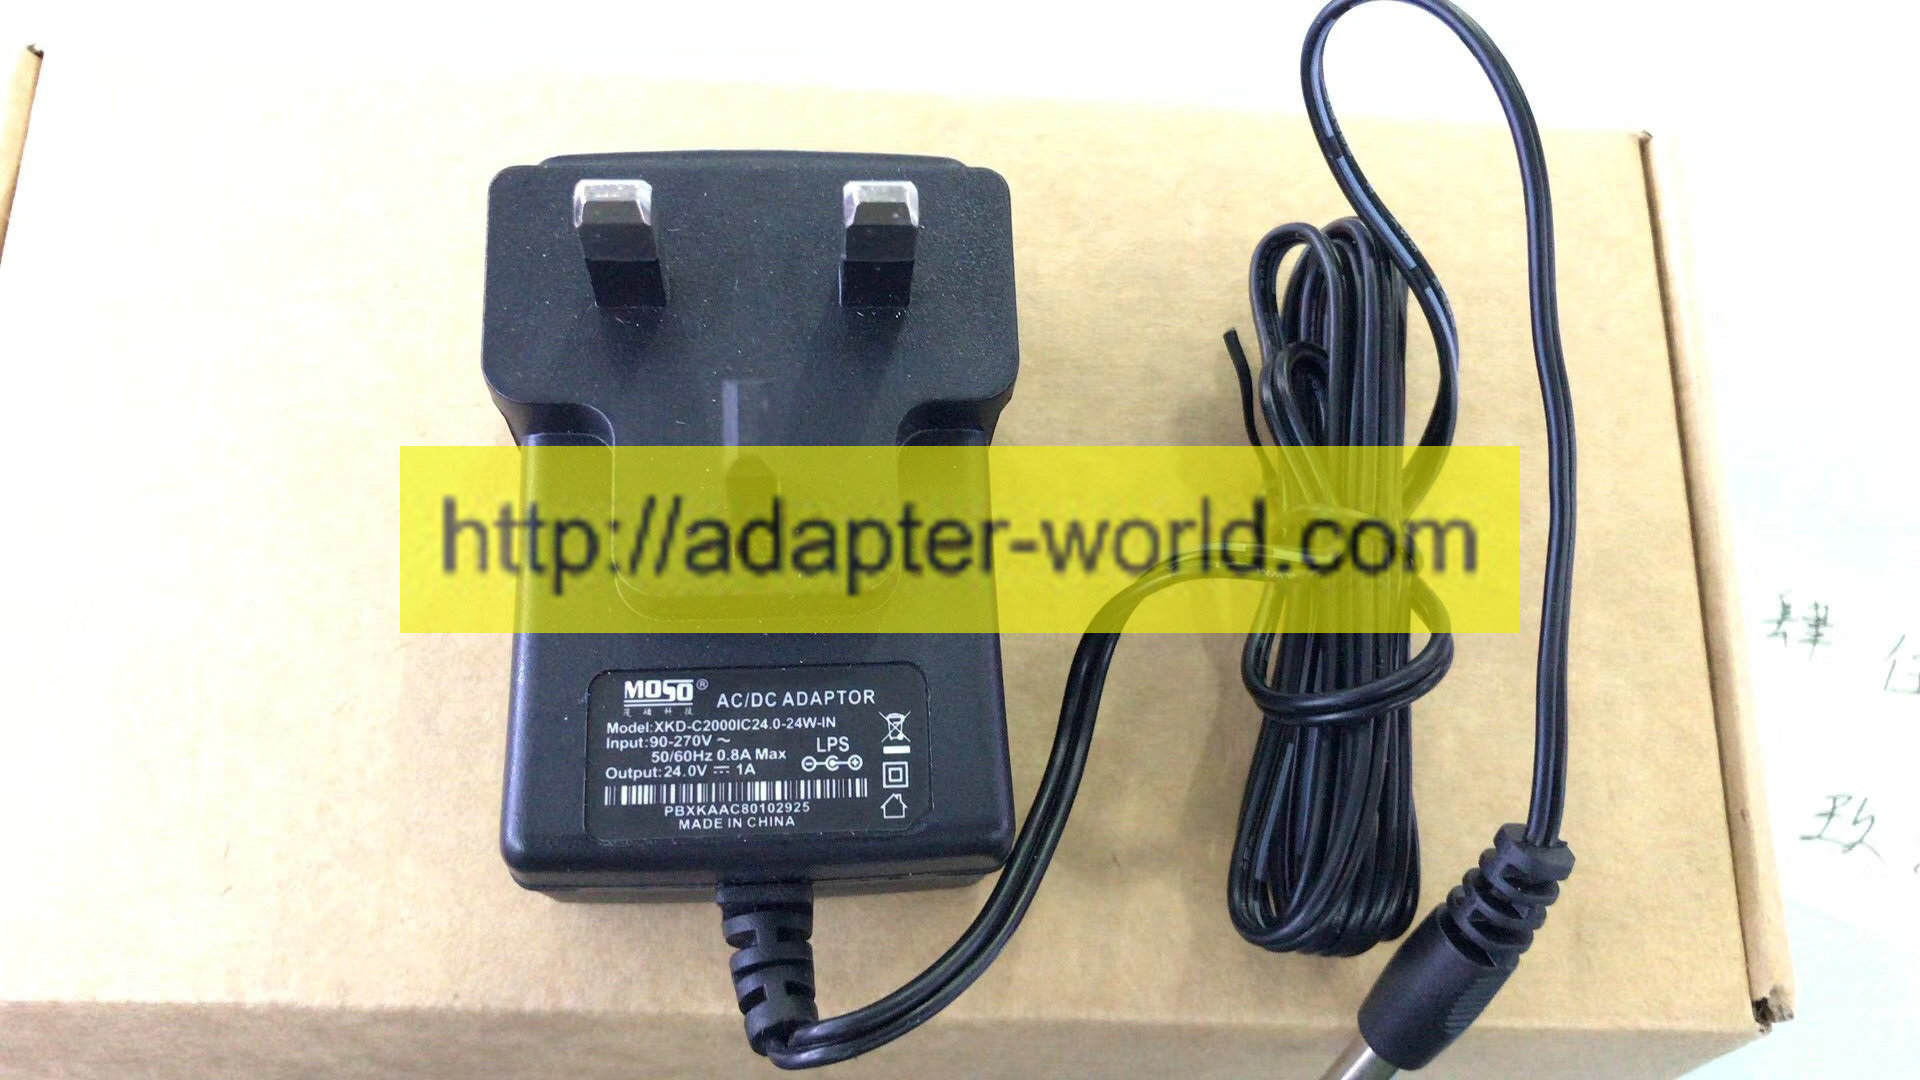 *100% Brand NEW* MOSO XKD-C2000IC24.0-24W-IN 24.0v ---1A Switching AC/DC ADAPTOR Power Adapter Free shipping!